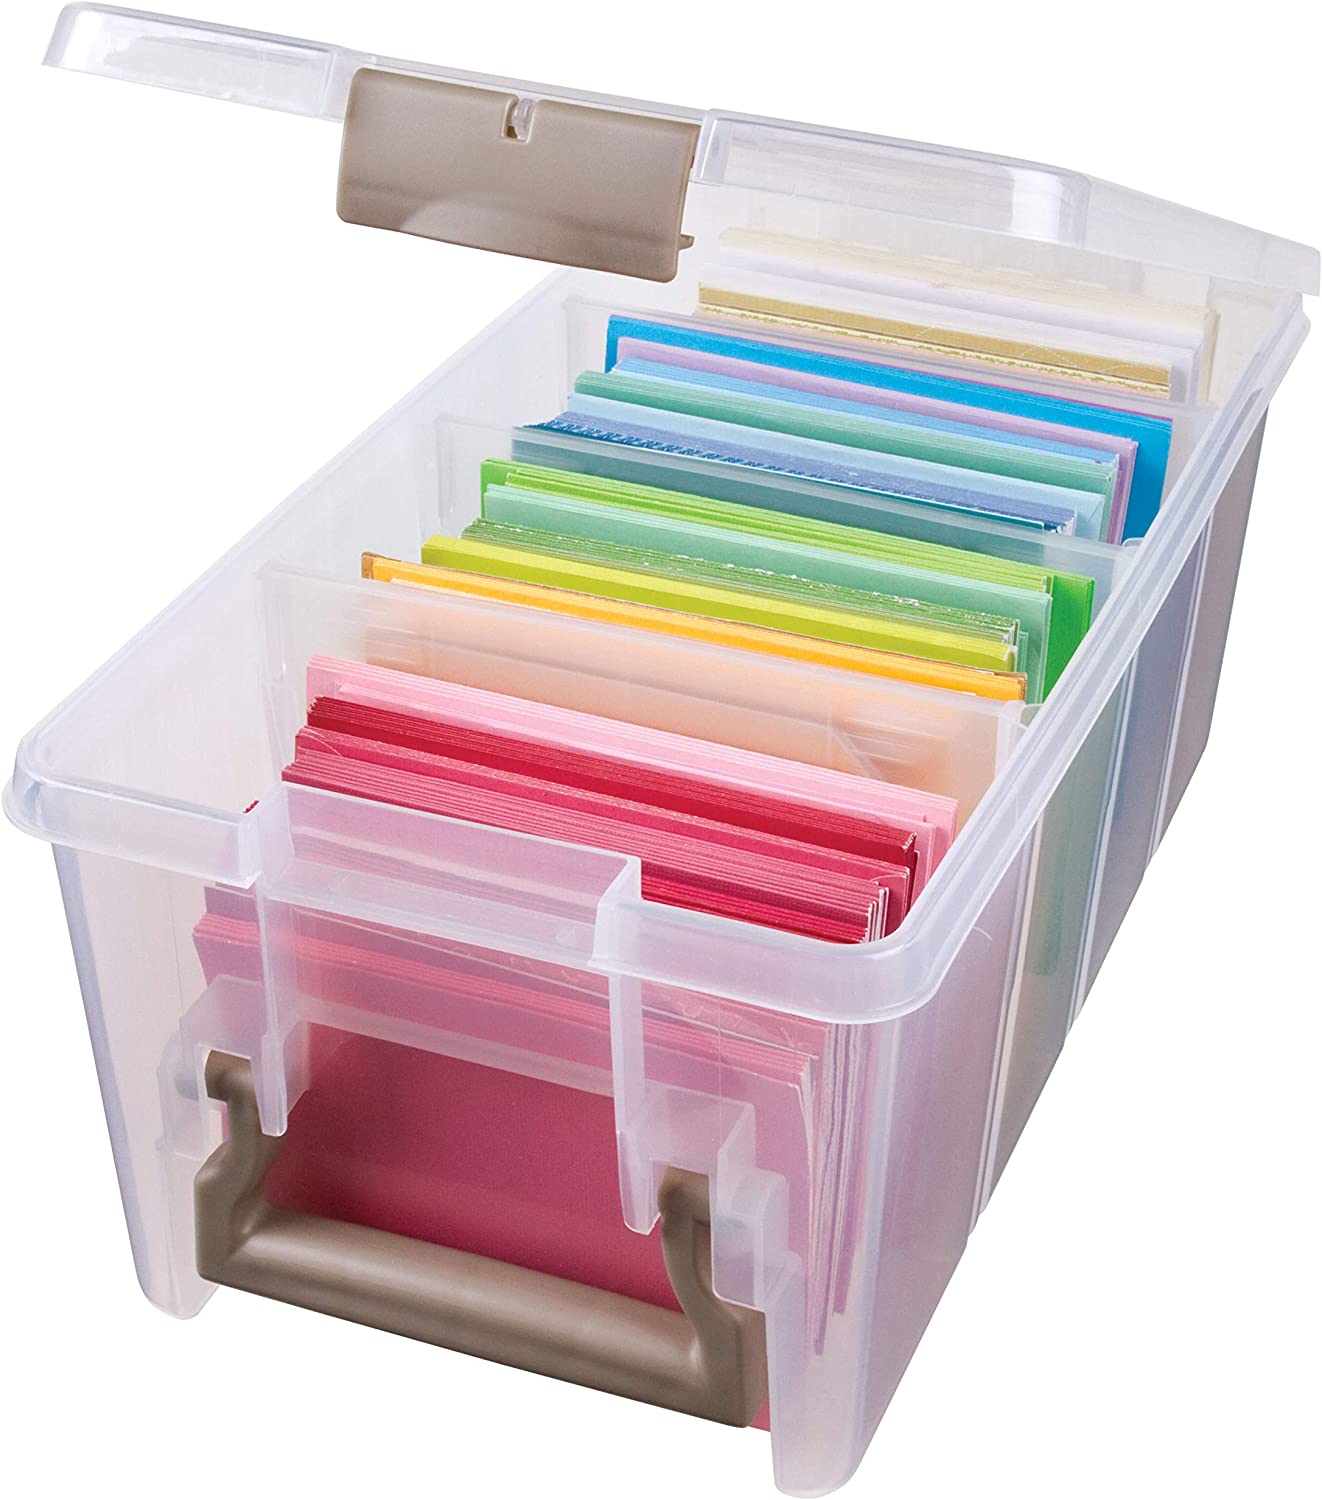 CRAFT MATES Items Craft & Sewing Supplies Storage, 7 Locking Compartments  (2XL), Clear Lids